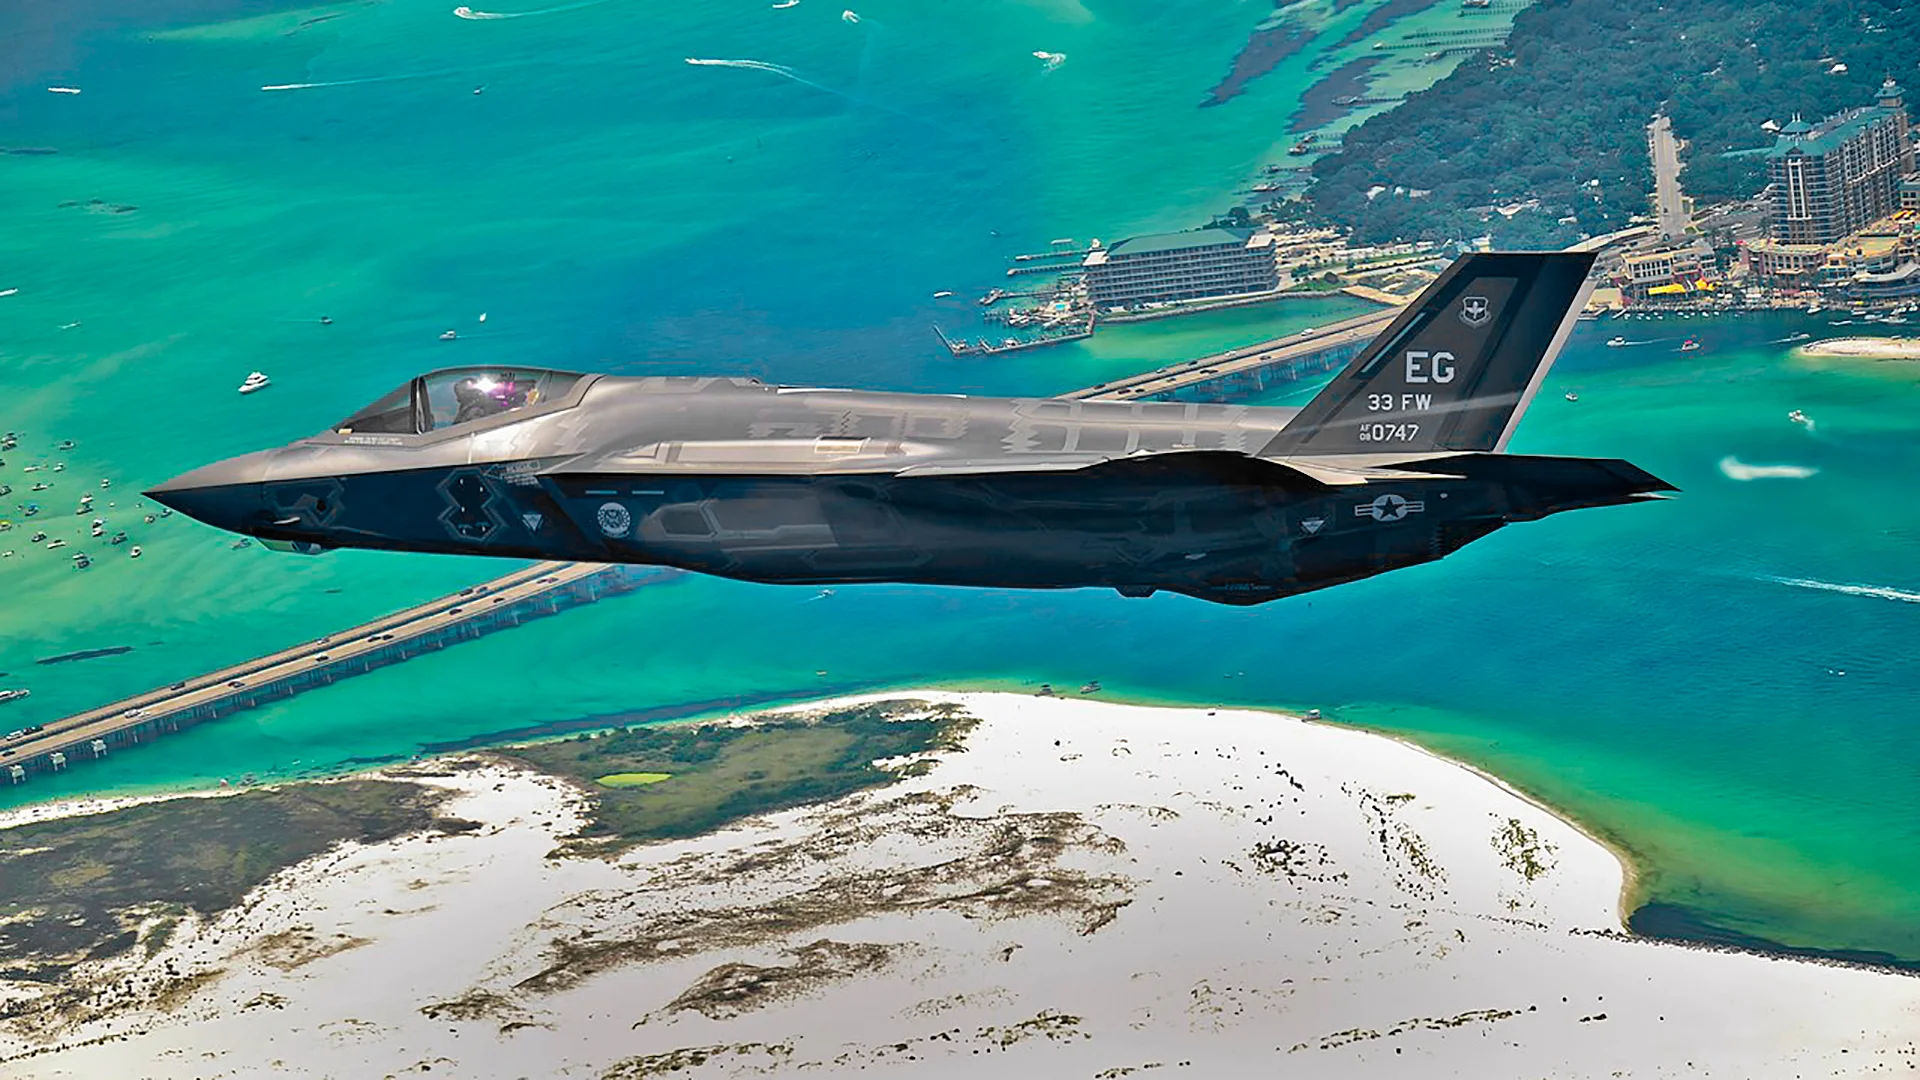 The US Air Force is warning Florida residents of noisy evenings due to flights of fifth-generation F-35 Lightning II fighter jets